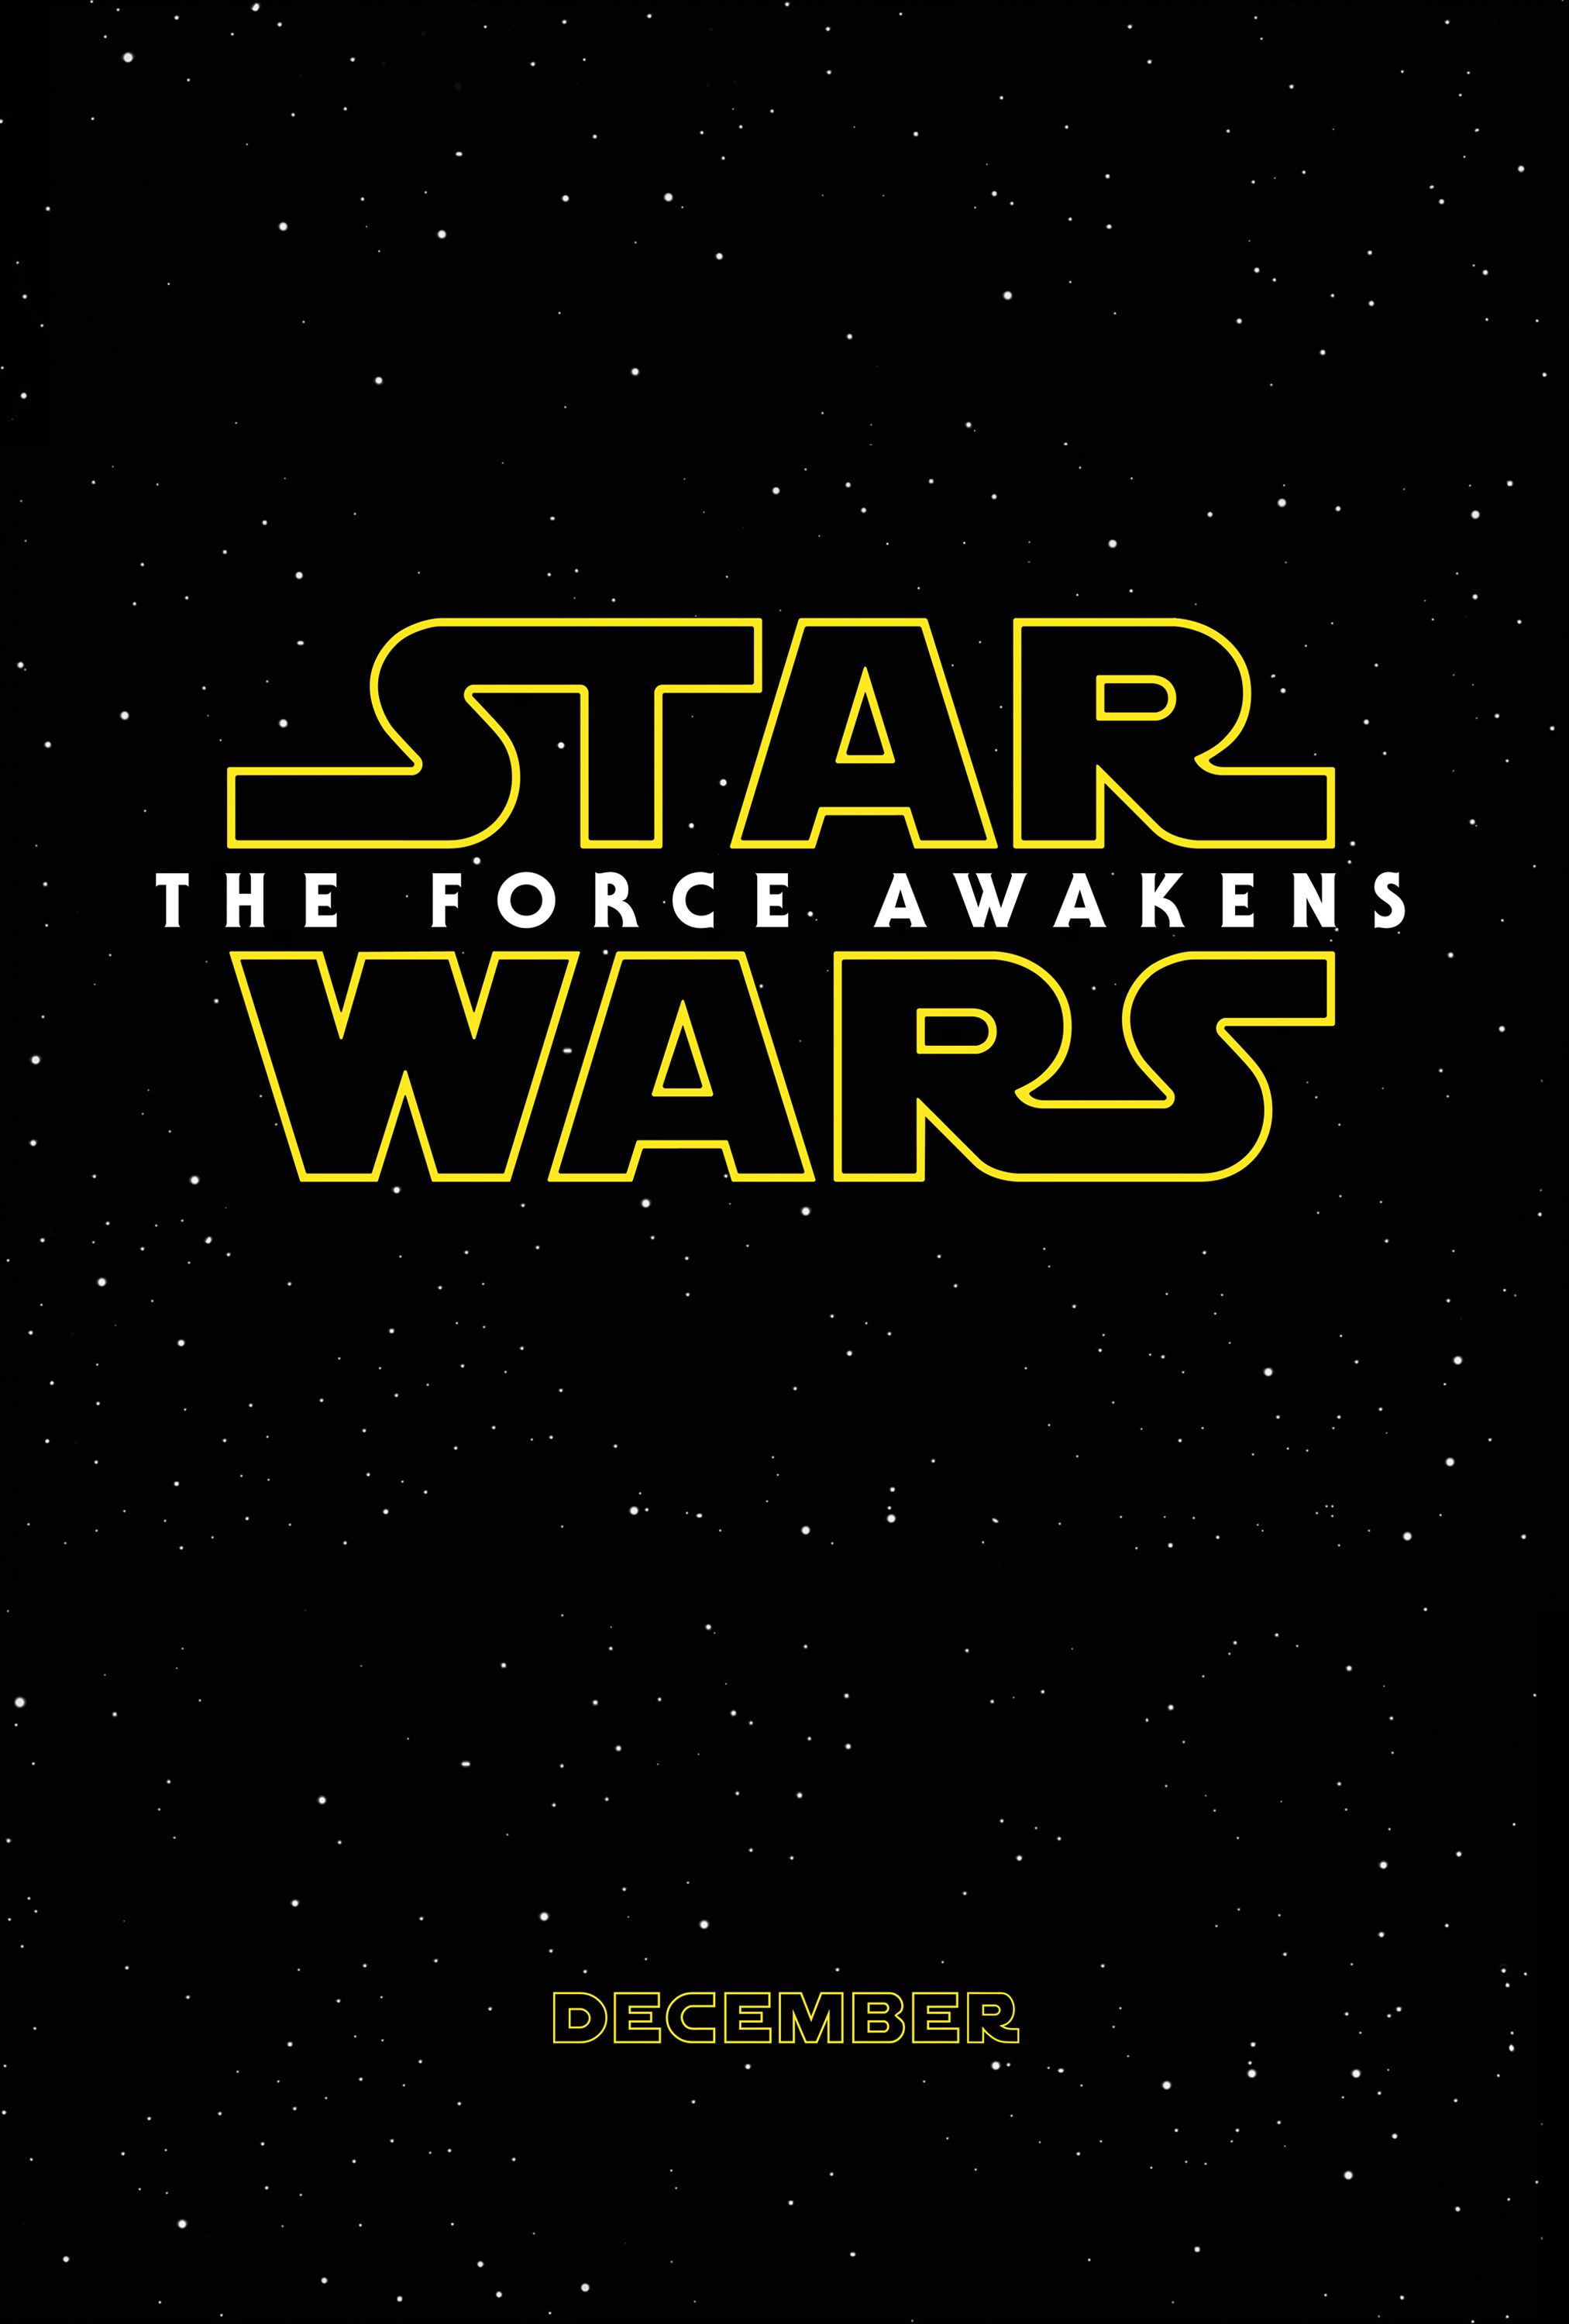 Star Wars 7 Trailer Reveals More The Force Awakens Footage | Collider2025 x 3000